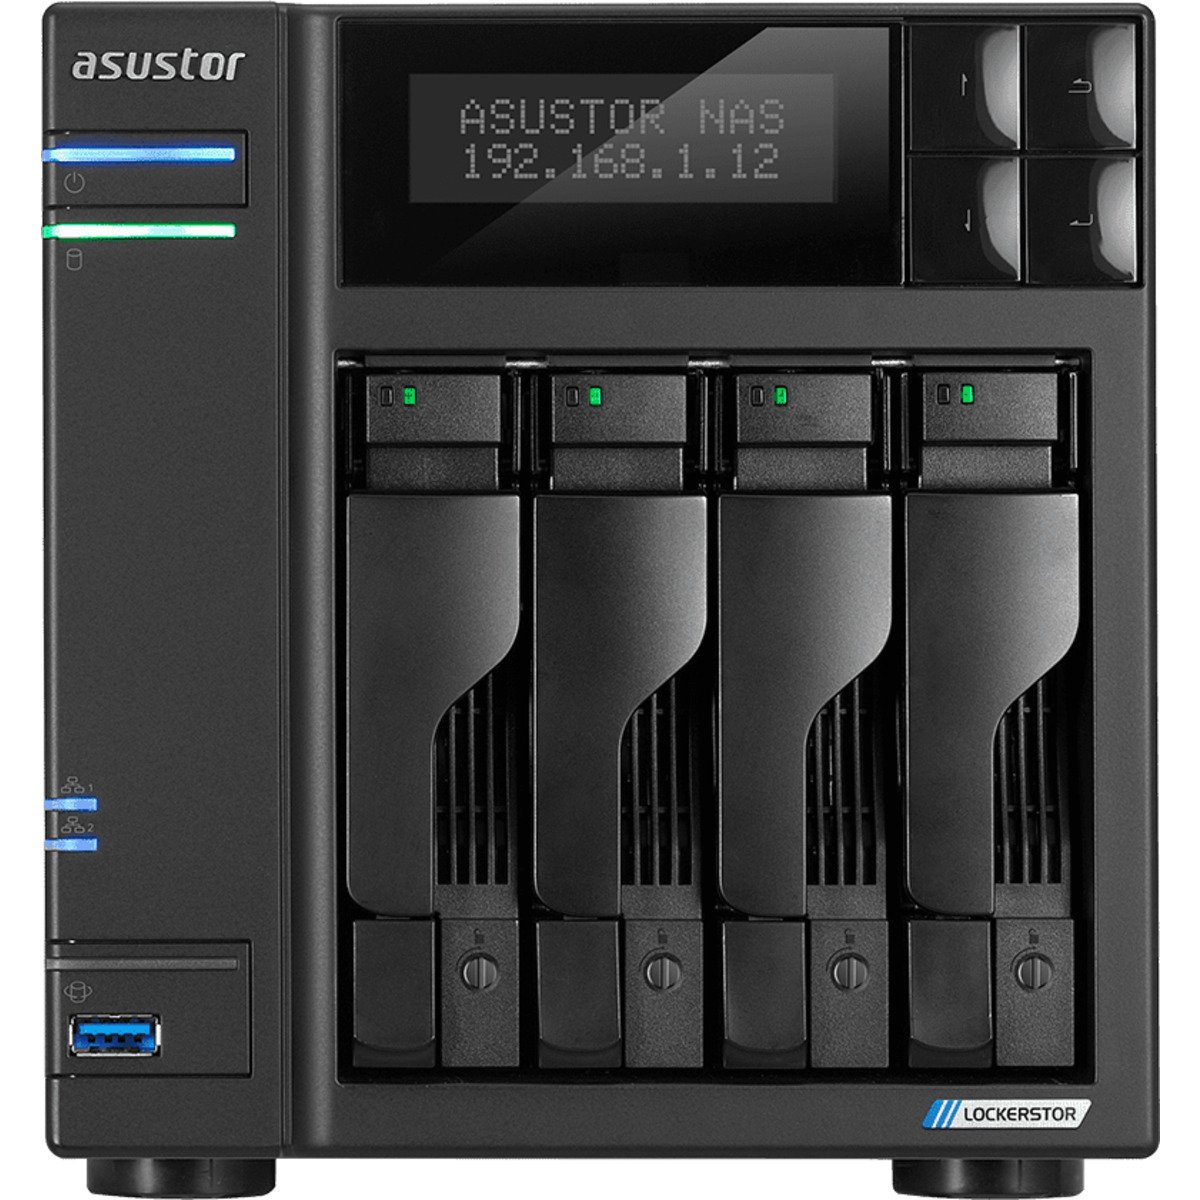 ASUSTOR AS6604T Lockerstor 4 40tb 4-Bay Desktop Multimedia / Power User / Business NAS - Network Attached Storage Device 4x10tb Seagate EXOS X18 ST10000NM018G 3.5 7200rpm SATA 6Gb/s HDD ENTERPRISE Class Drives Installed - Burn-In Tested - FREE RAM UPGRADE AS6604T Lockerstor 4